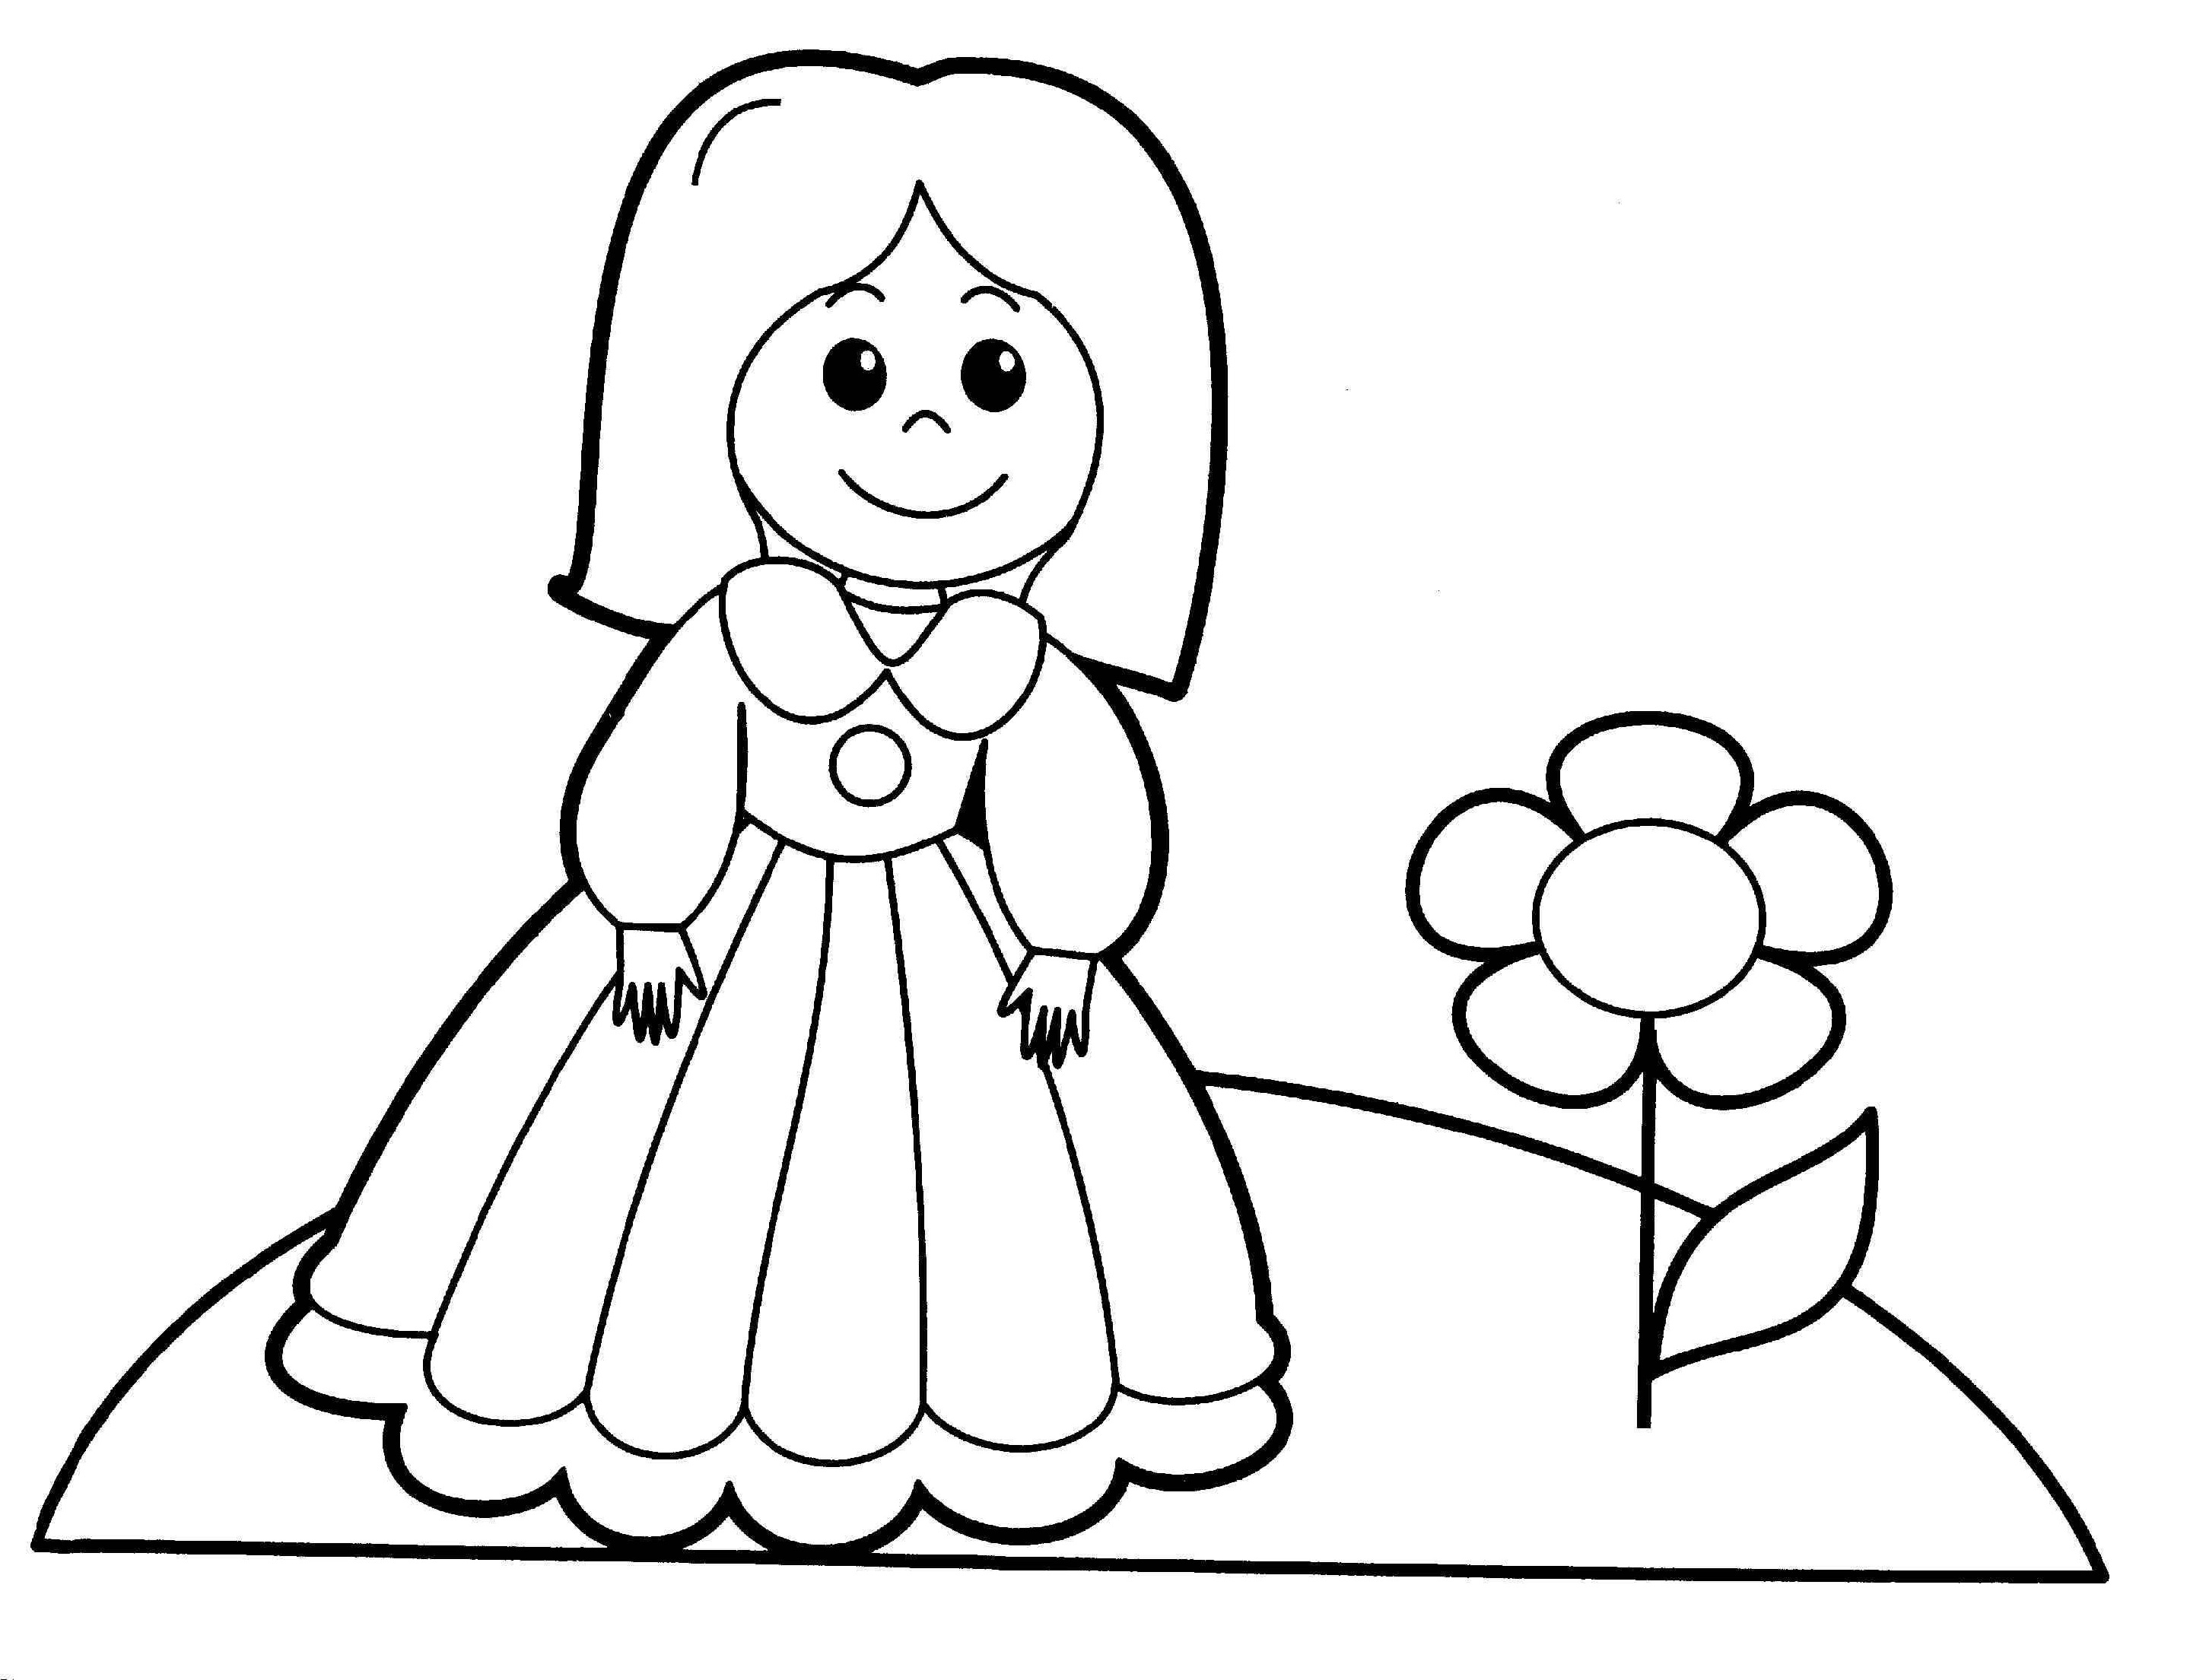 color alive coloring pages baby alive coloring pages getcoloringpagescom coloring color pages alive 